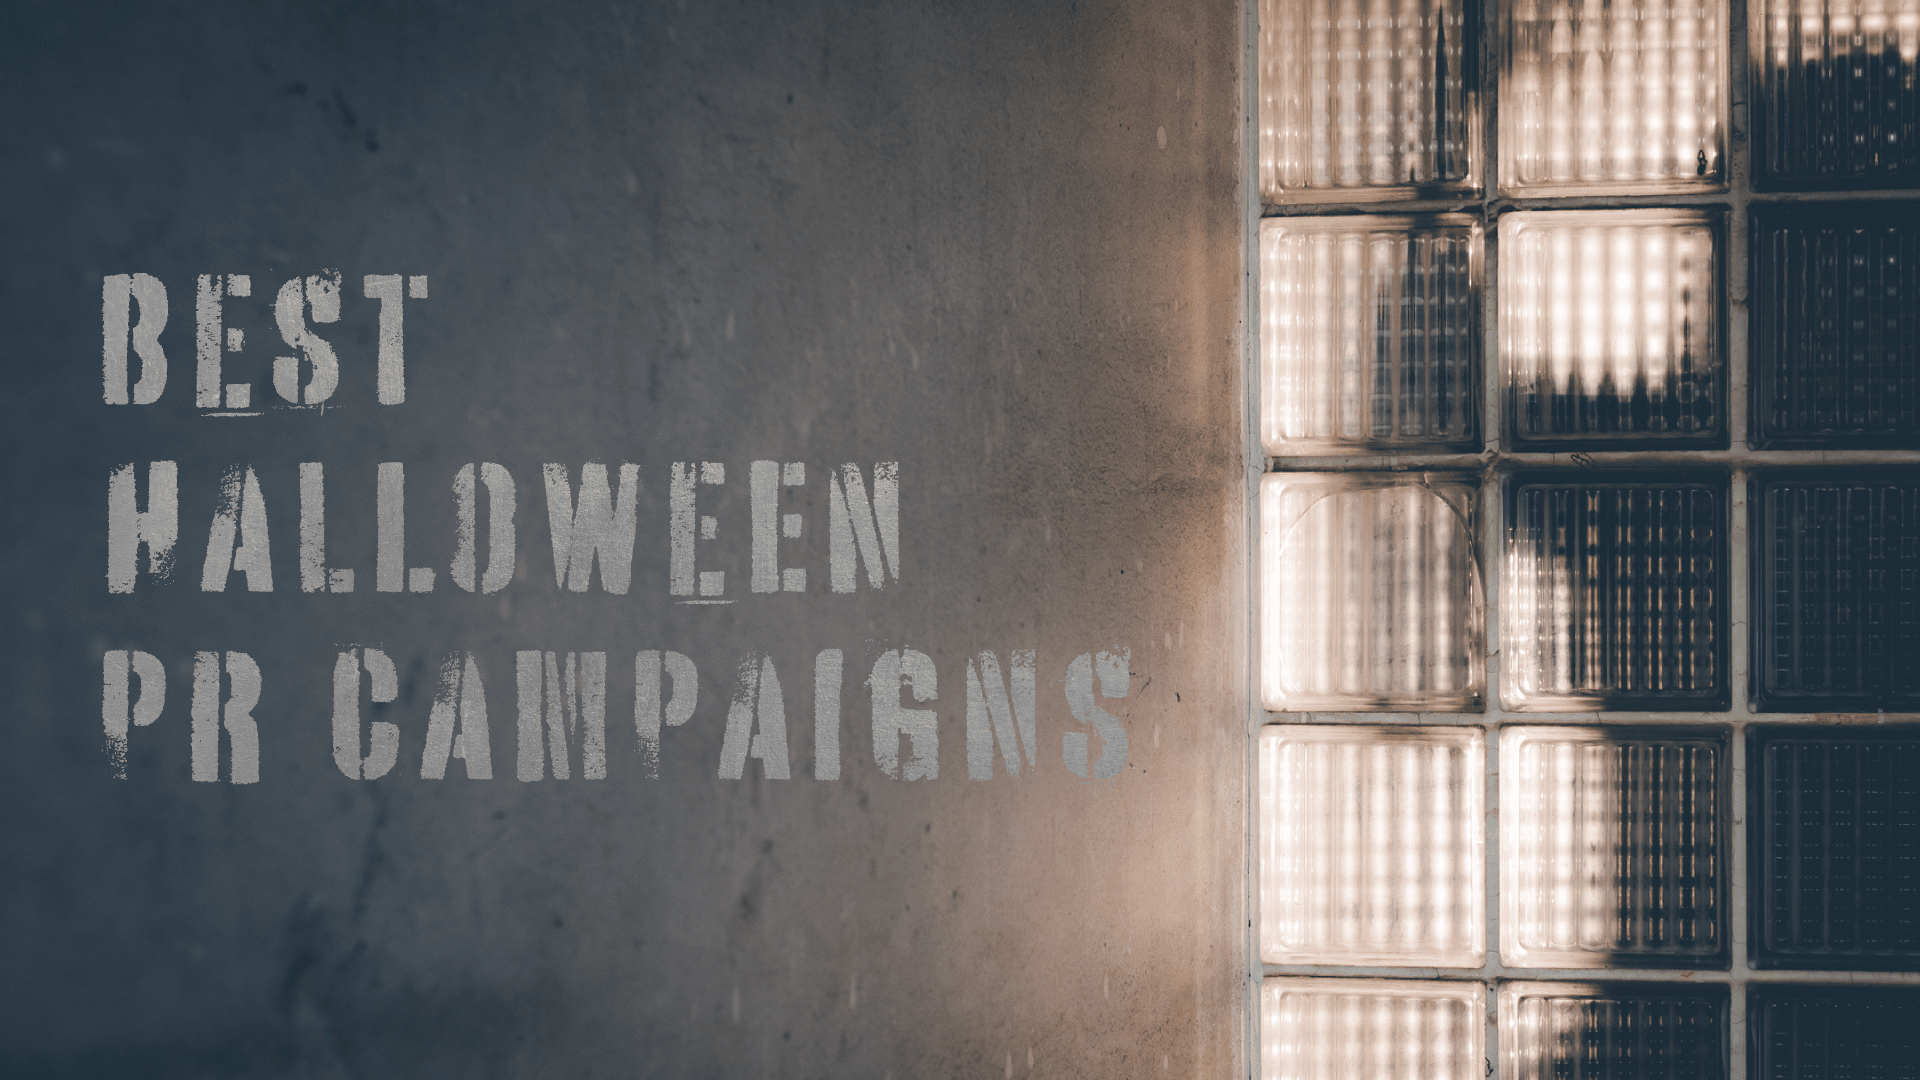 Top 10 Halloween PR and marketing campaigns